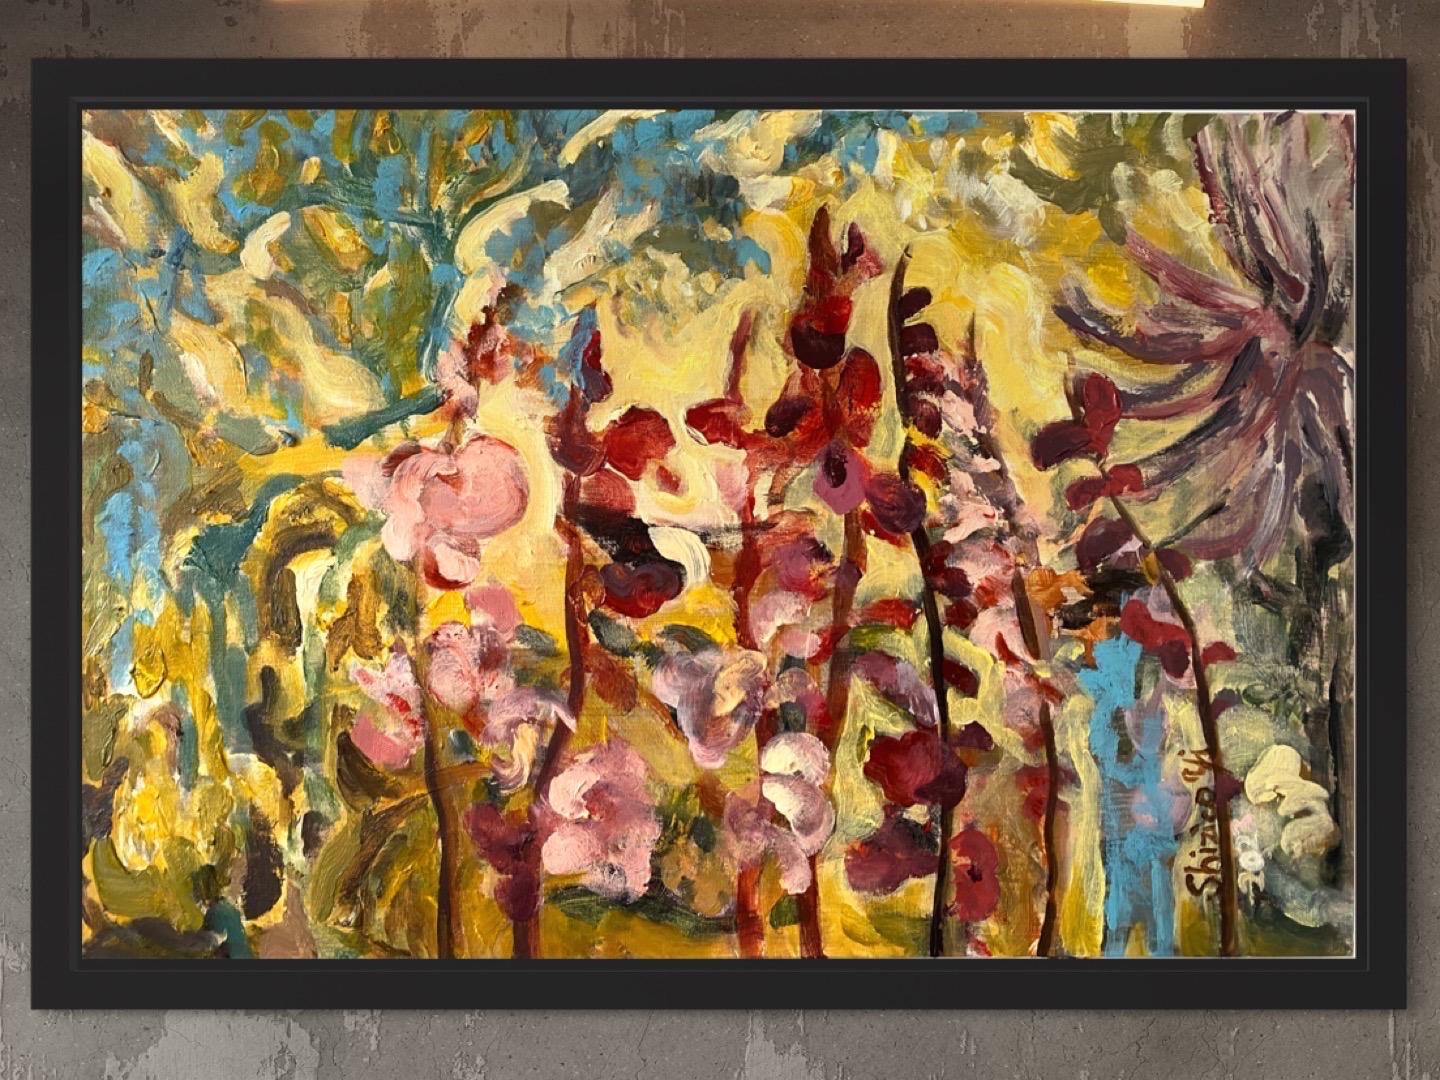 X-Large Proof-Gladiolus Glorious-rare last one #3/3-Hand Painted-UK Award Artist - Abstract Expressionist Painting by Shizico Yi